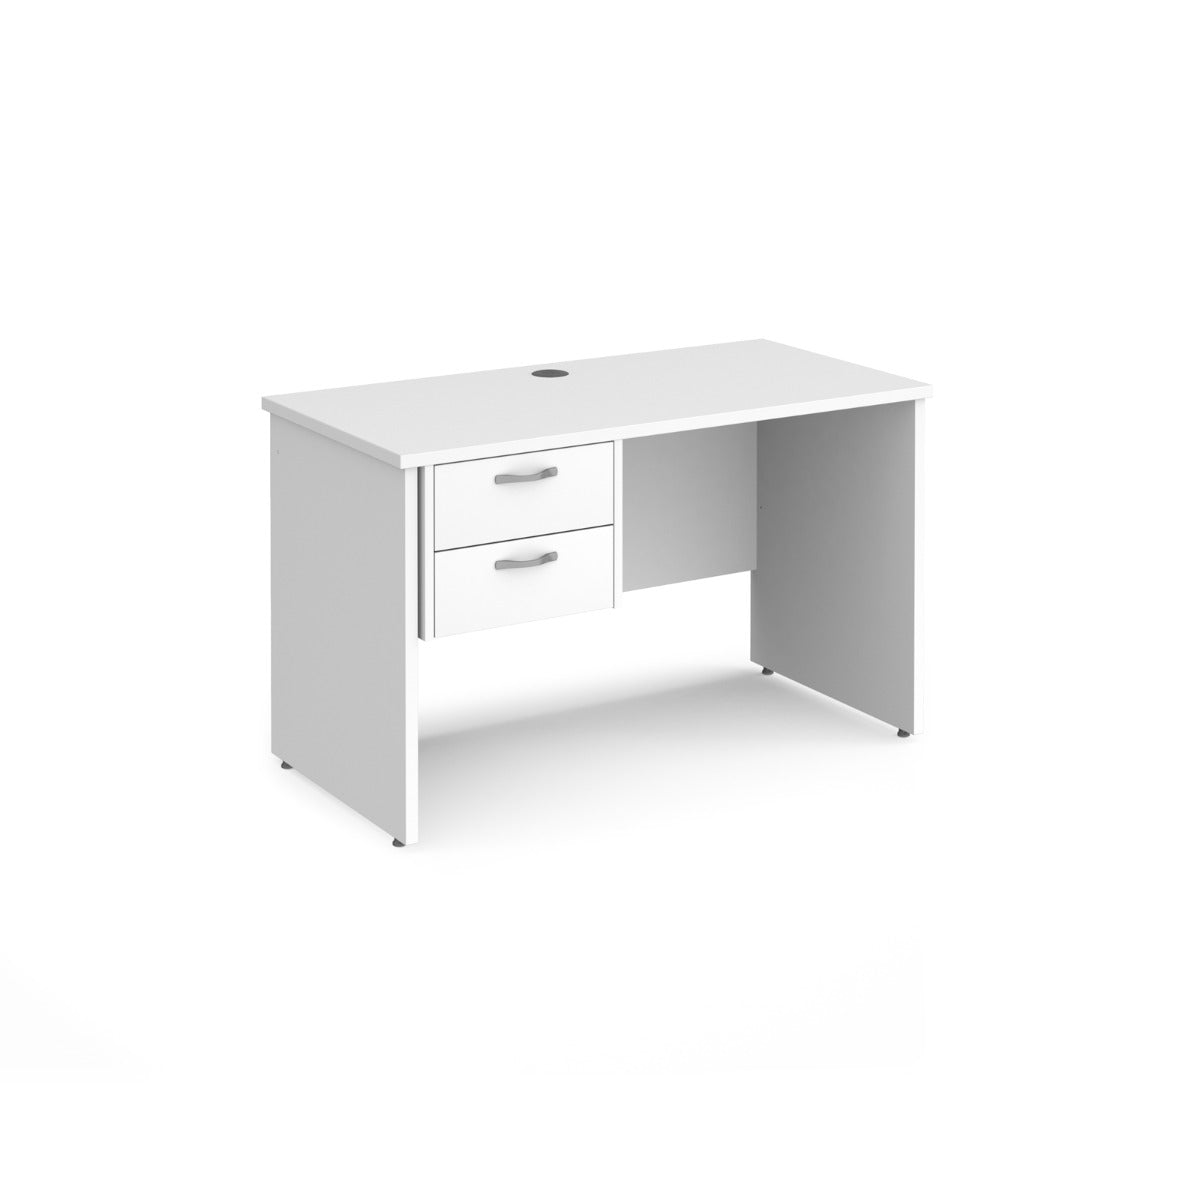 Maestro 600mm Deep Straight Panel Leg Office Desk with Two Drawer Pedestal